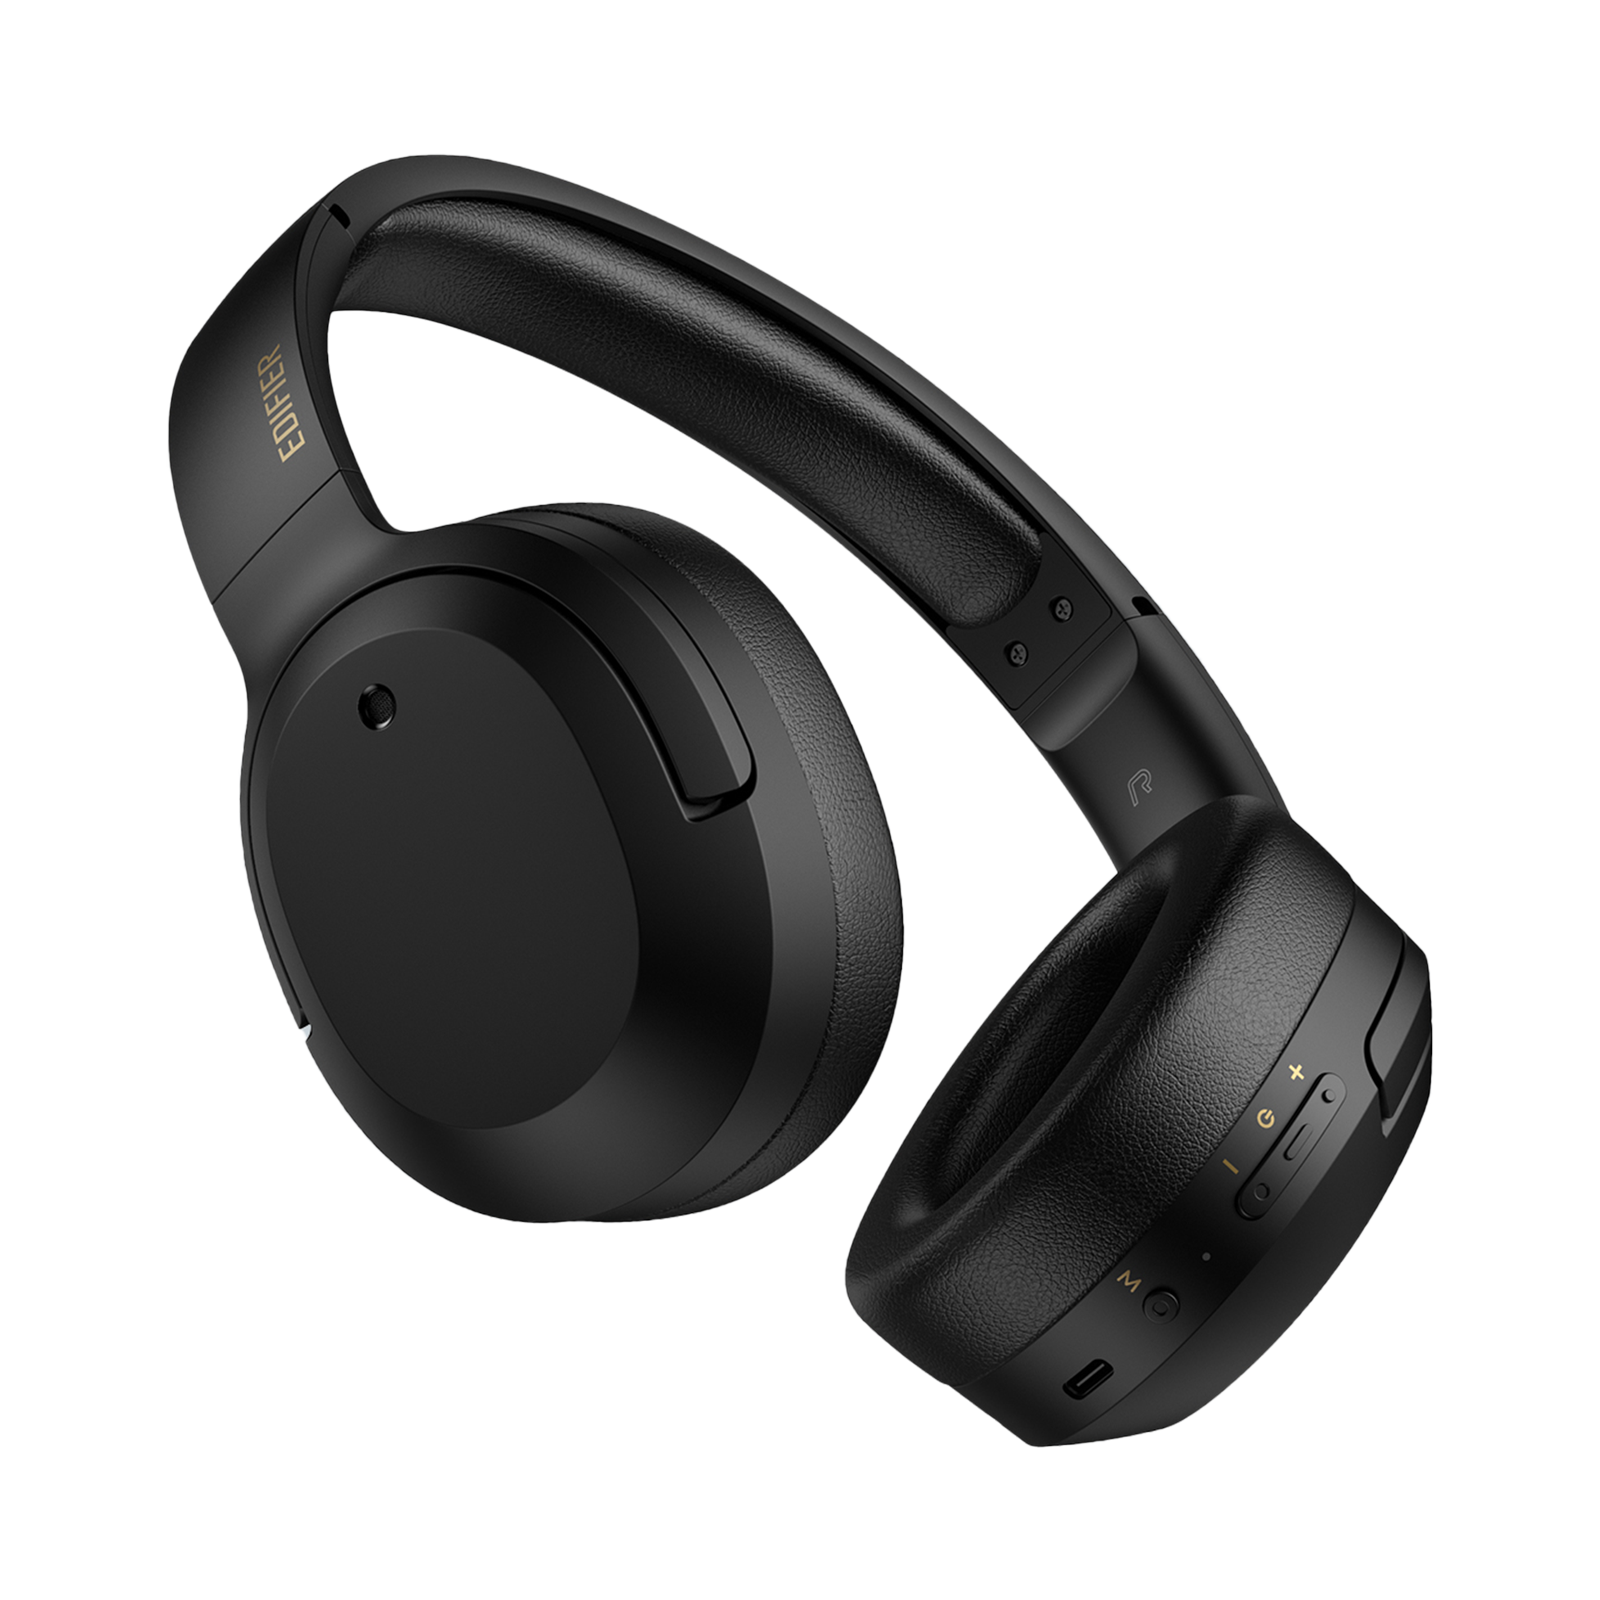 W820NB Plus Wireless Noise Cancellation Over-Ear Headphones